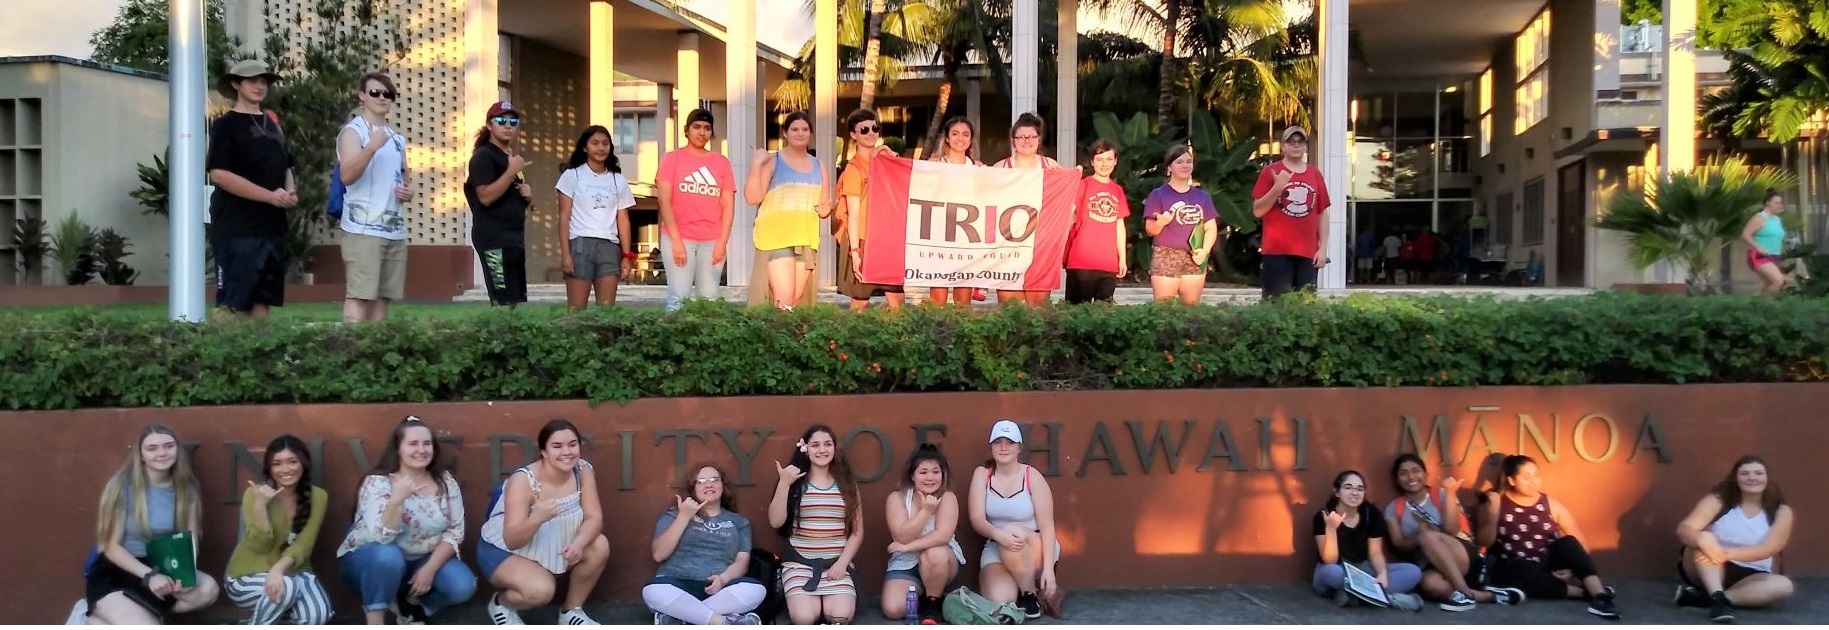 group of students in hawaii